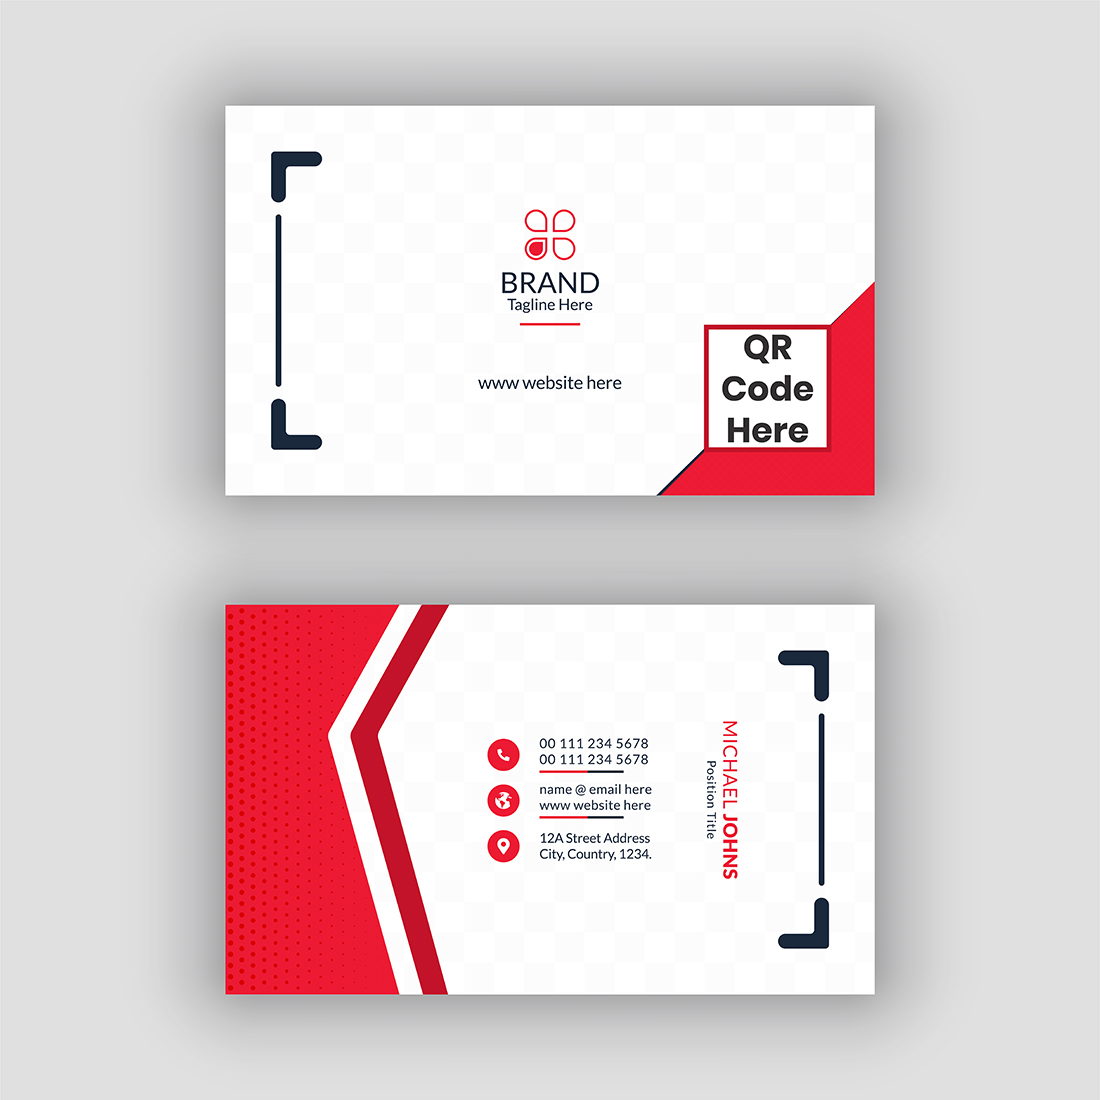 Restaurant Fast Food Business Cards cover image.